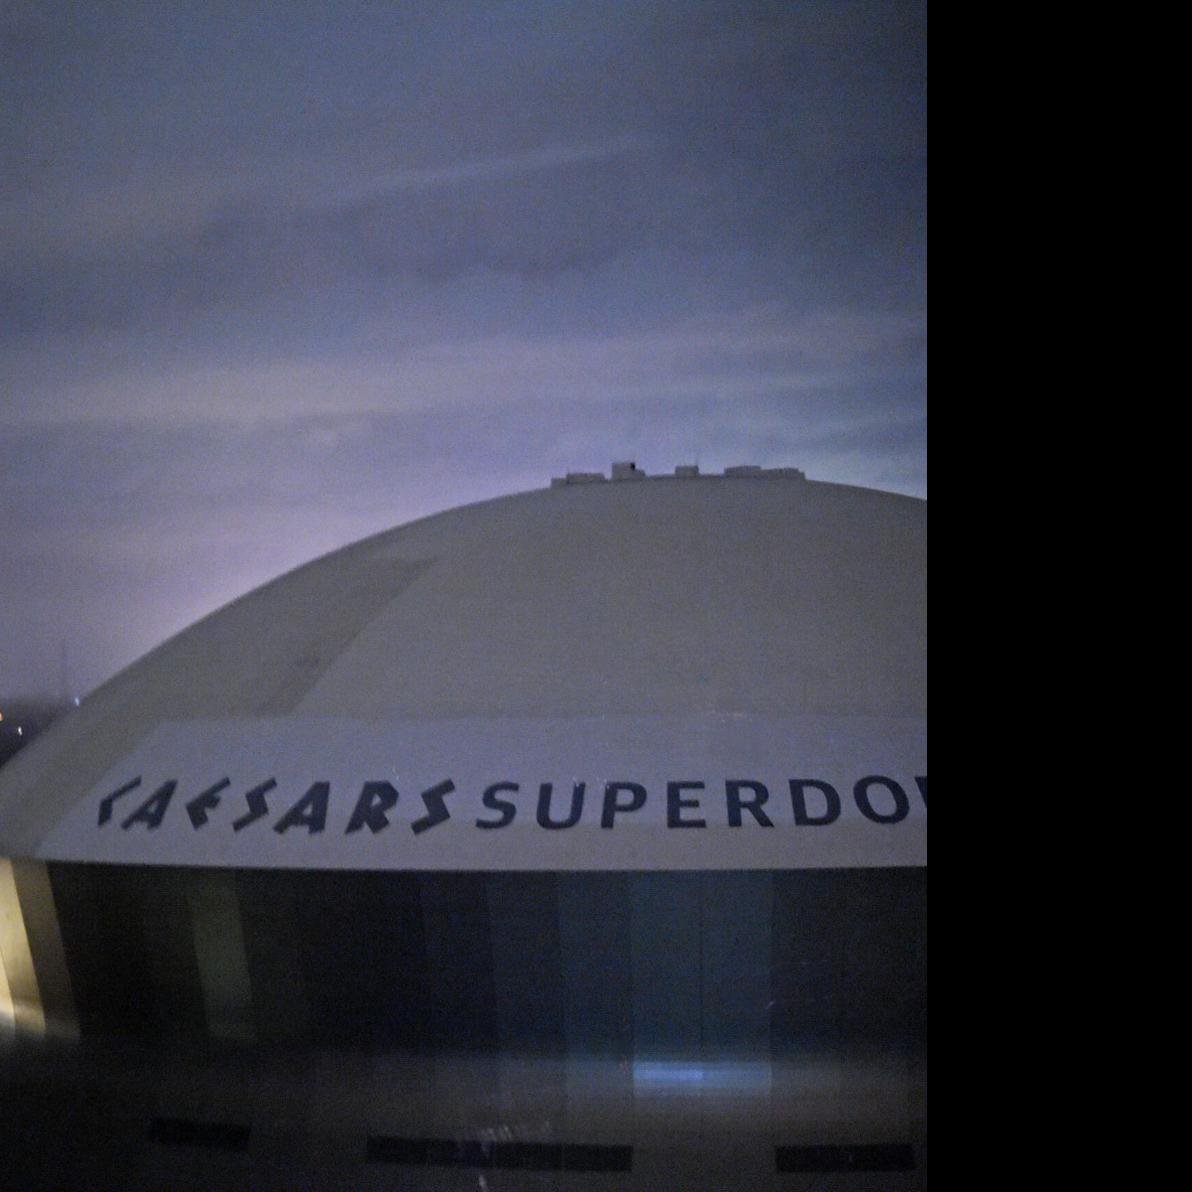 Superdome's $28M in improvements approved by Bond Commission after COVID  ticket policy delay, State Politics